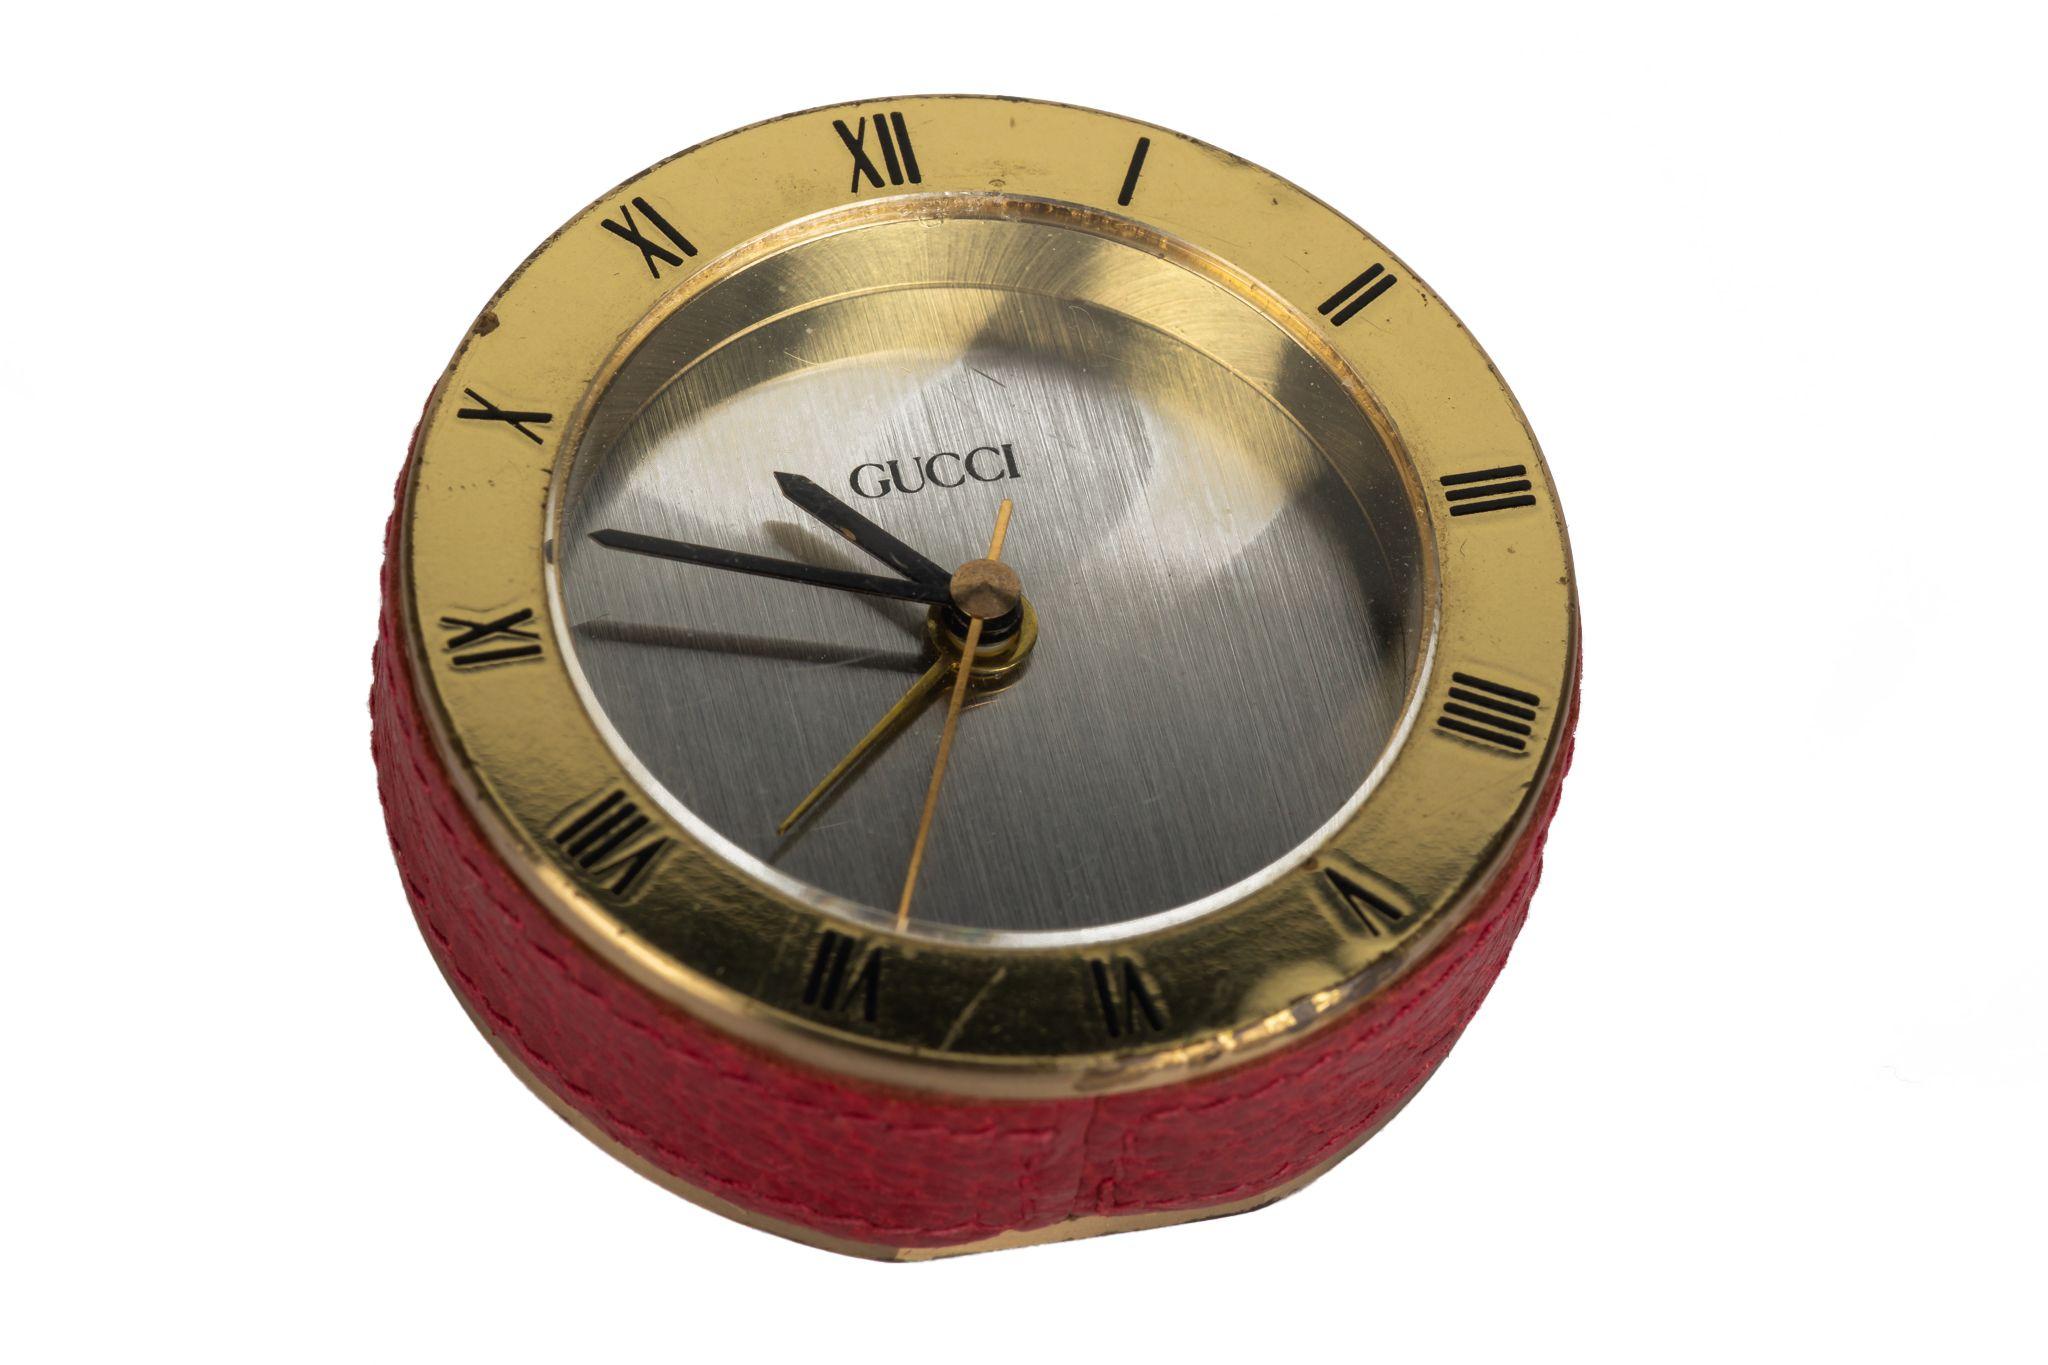 Gucci vintage table to travel alarm clock. Gold metal and red leather, minor wear throughout. Comes with velvet pouch.